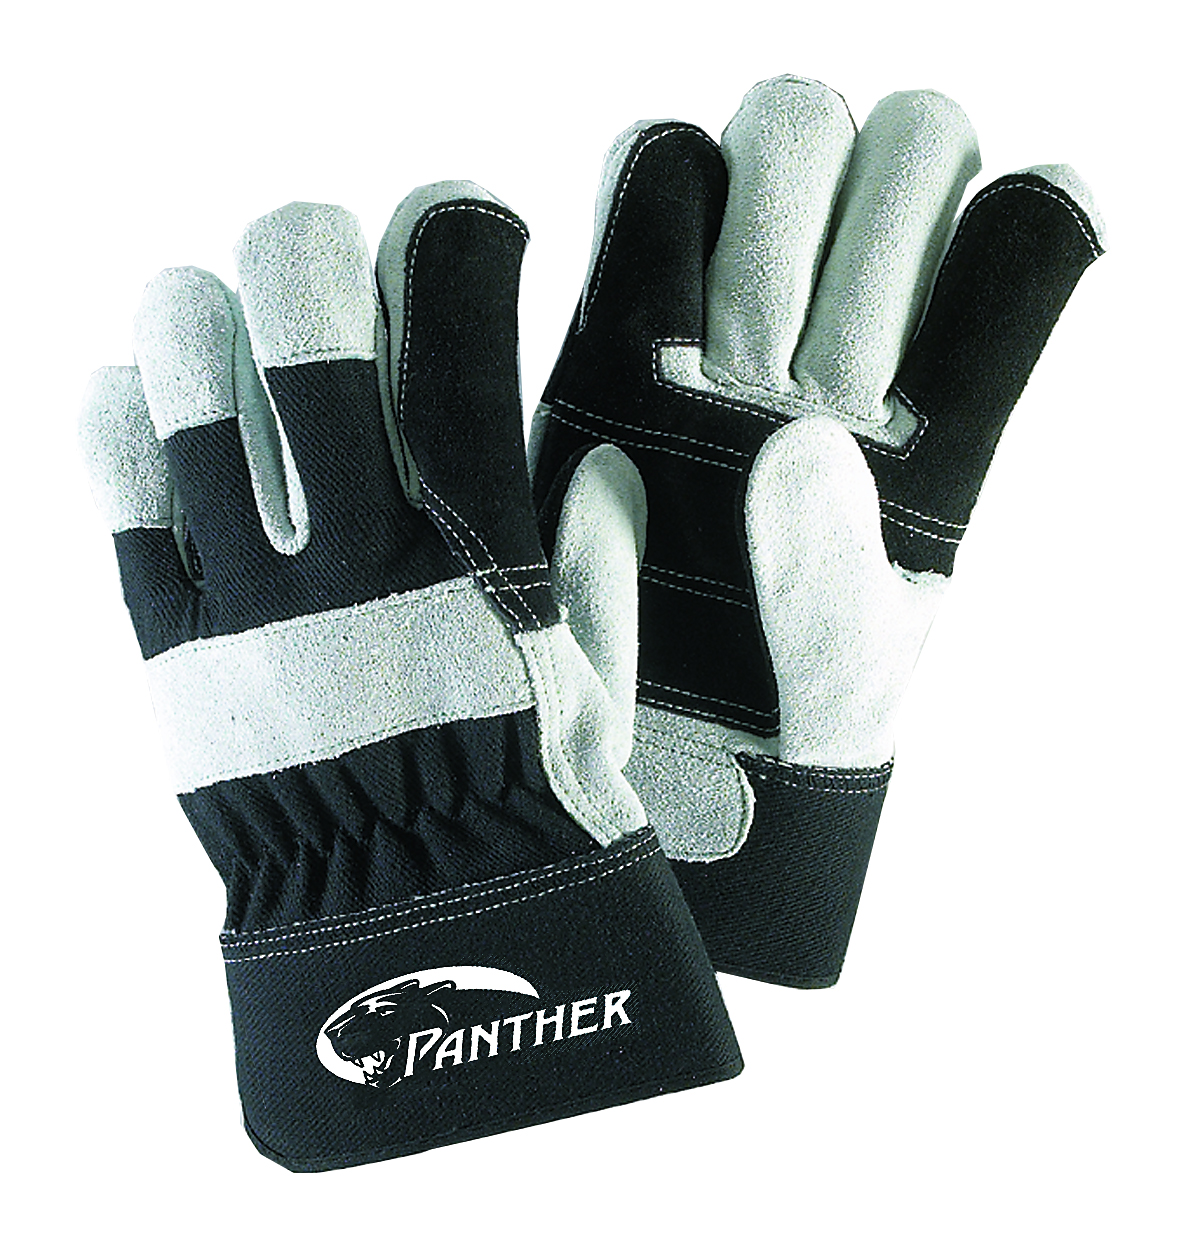 Panther&trade; Double Palm Gloves, Safety Cuff, 1 Pair